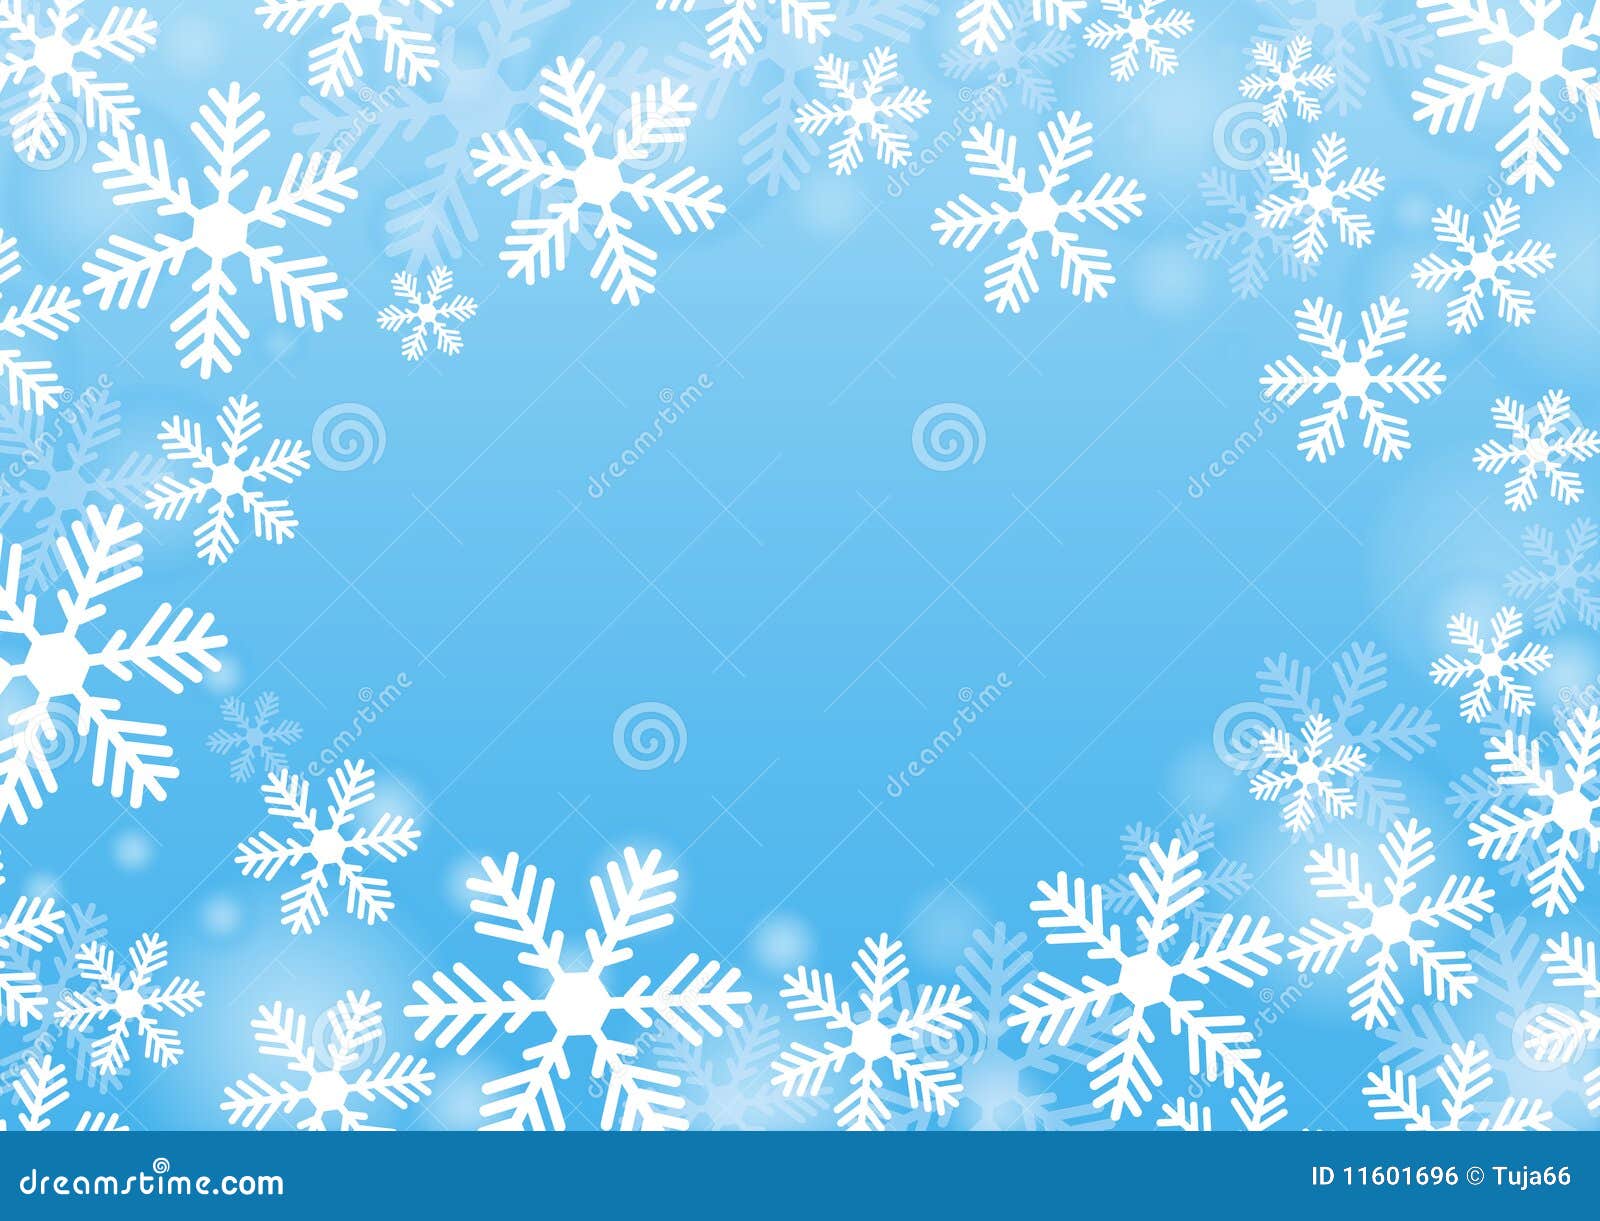 Snowflakes stock vector. Illustration of background, graphic - 11601696